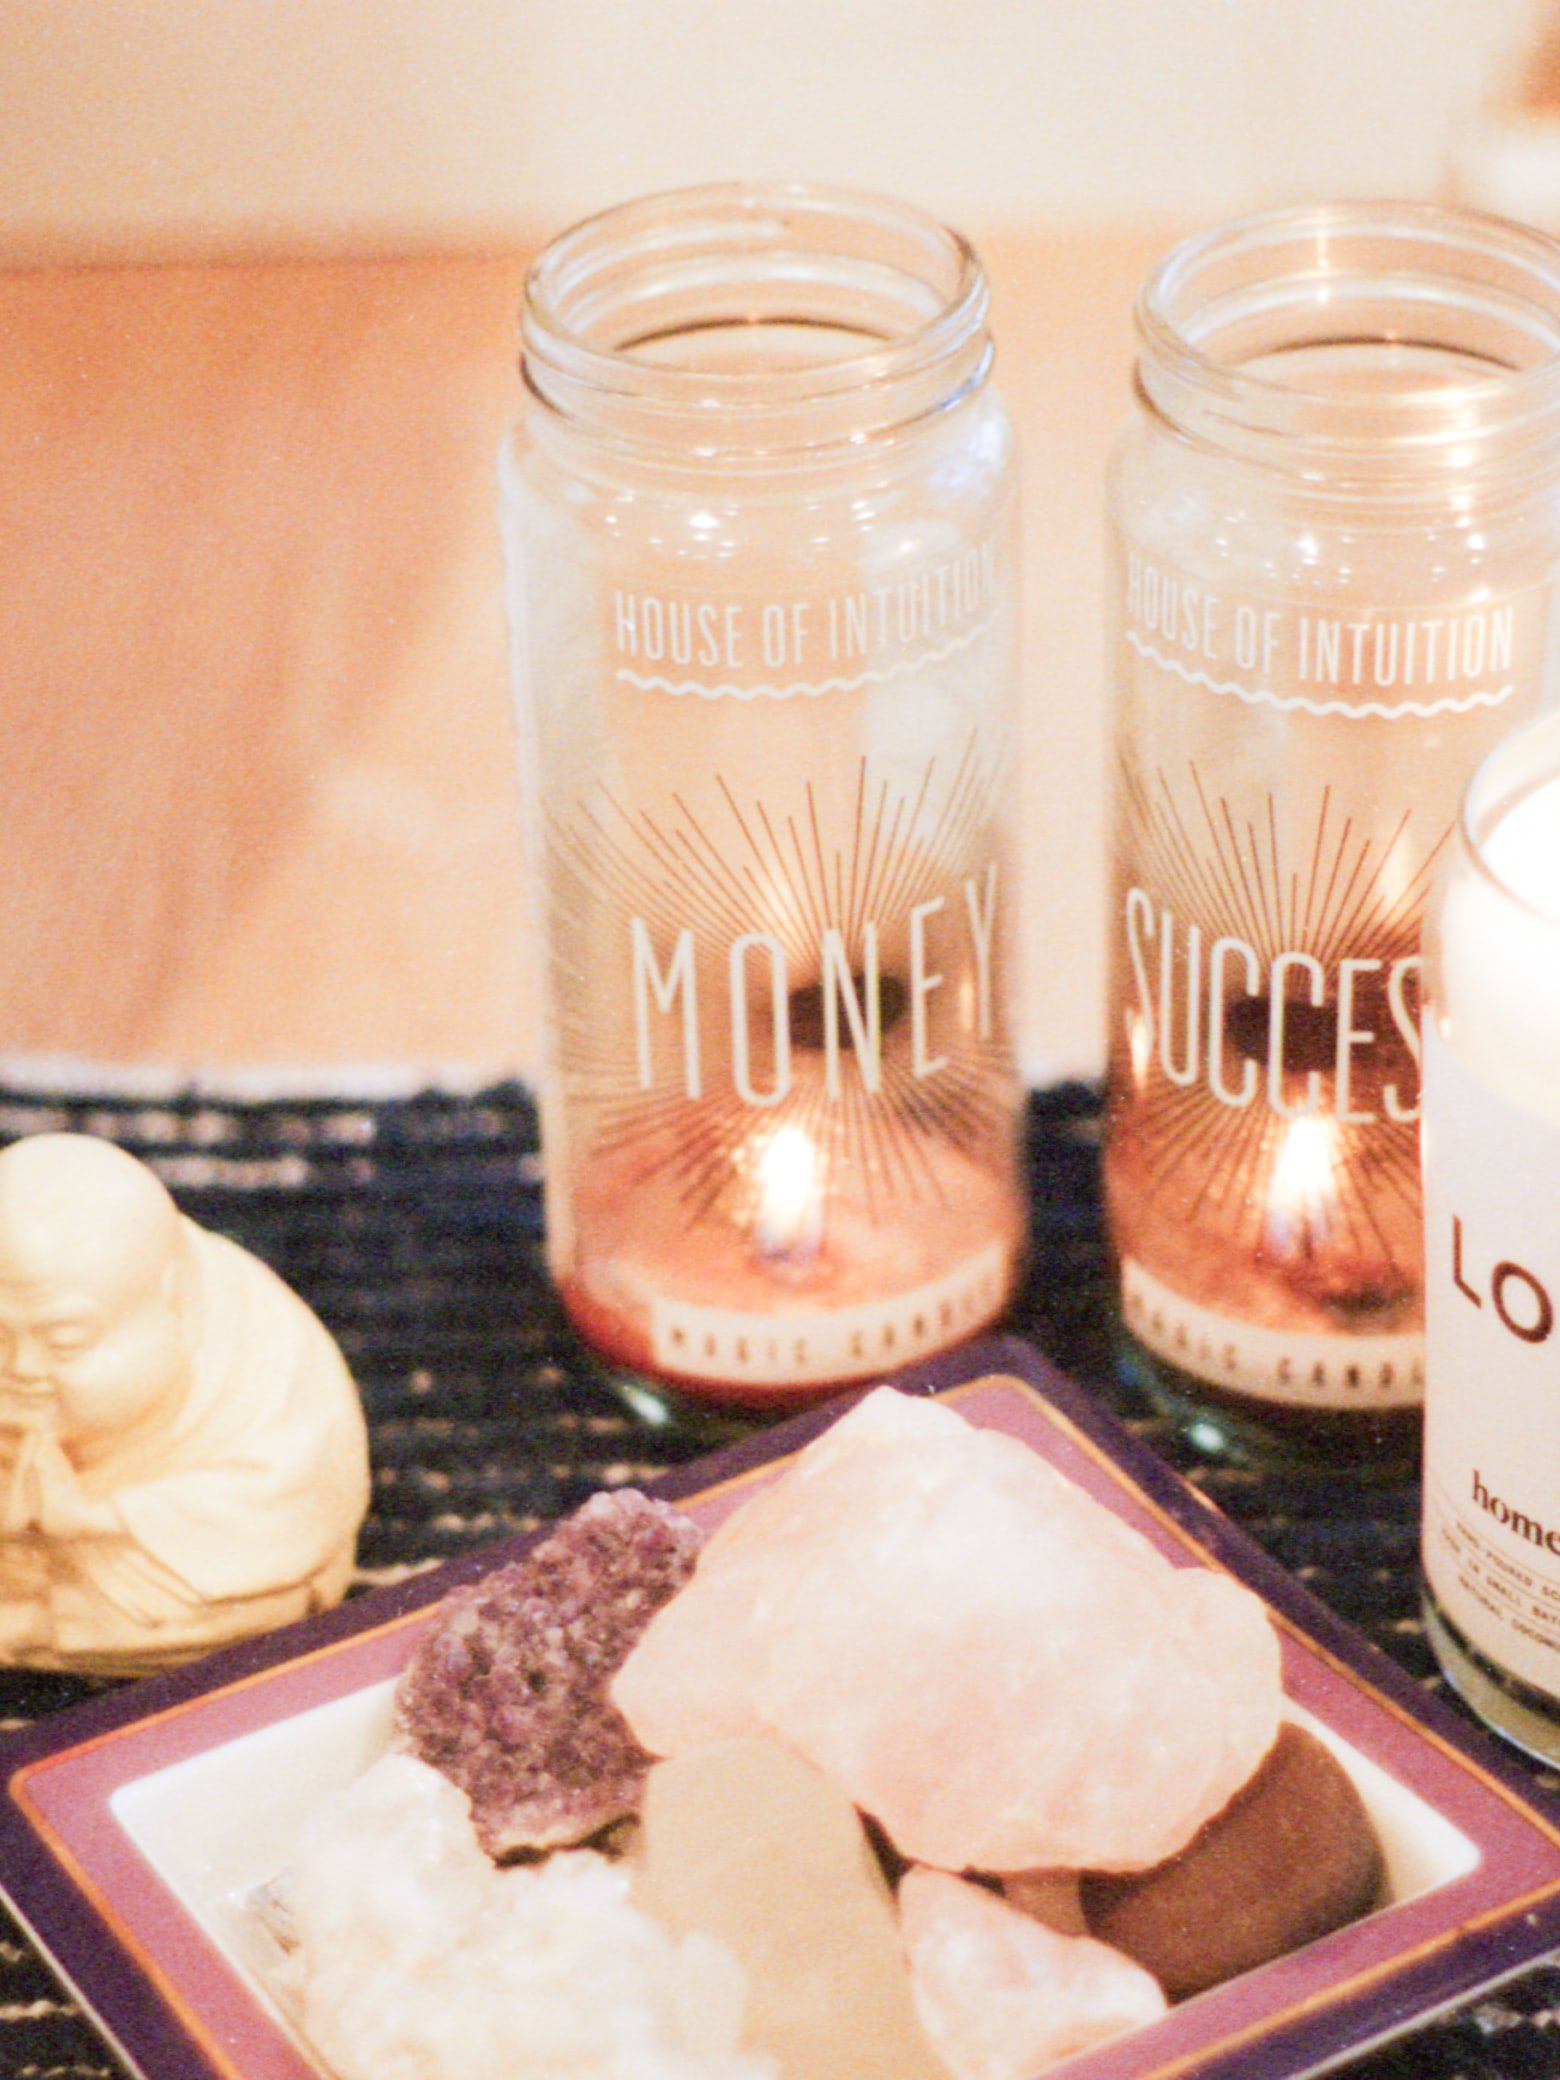 Celebrity makeup artist Jamie Greenberg's crystals and candles